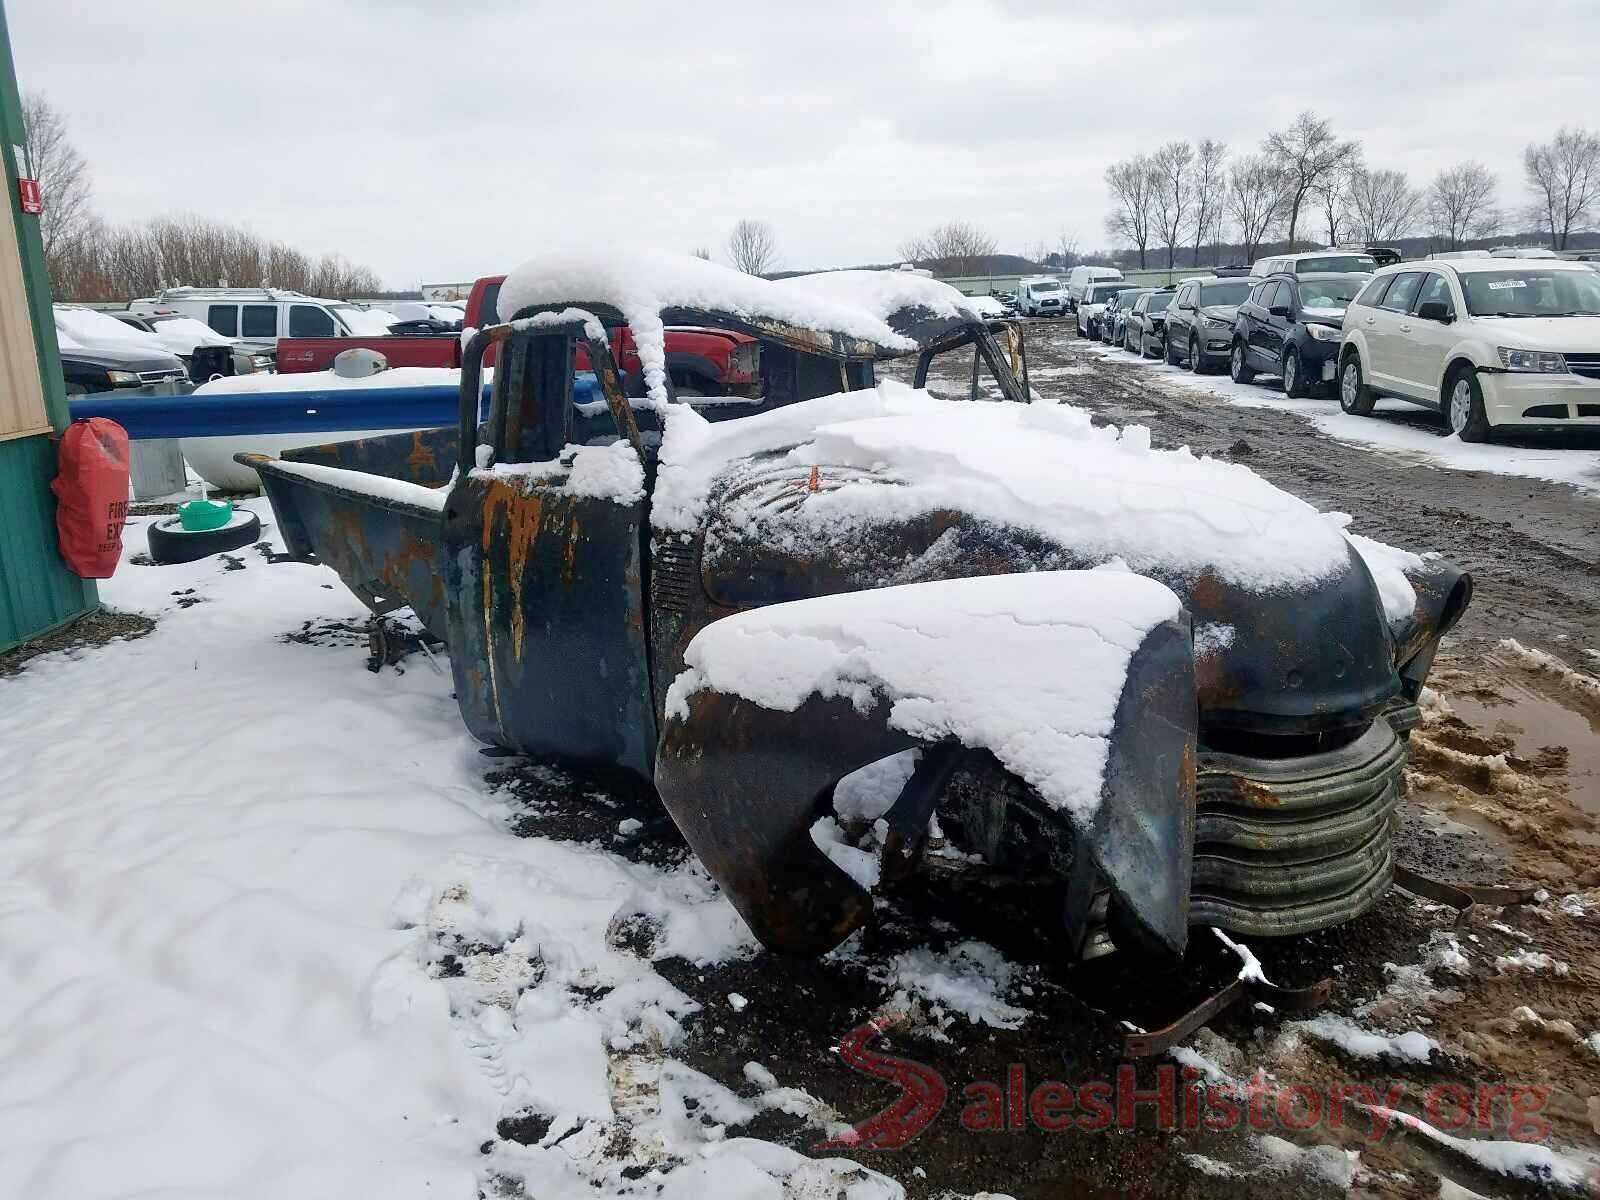 5KTB4917 1952 CHEVROLET ALL OTHER